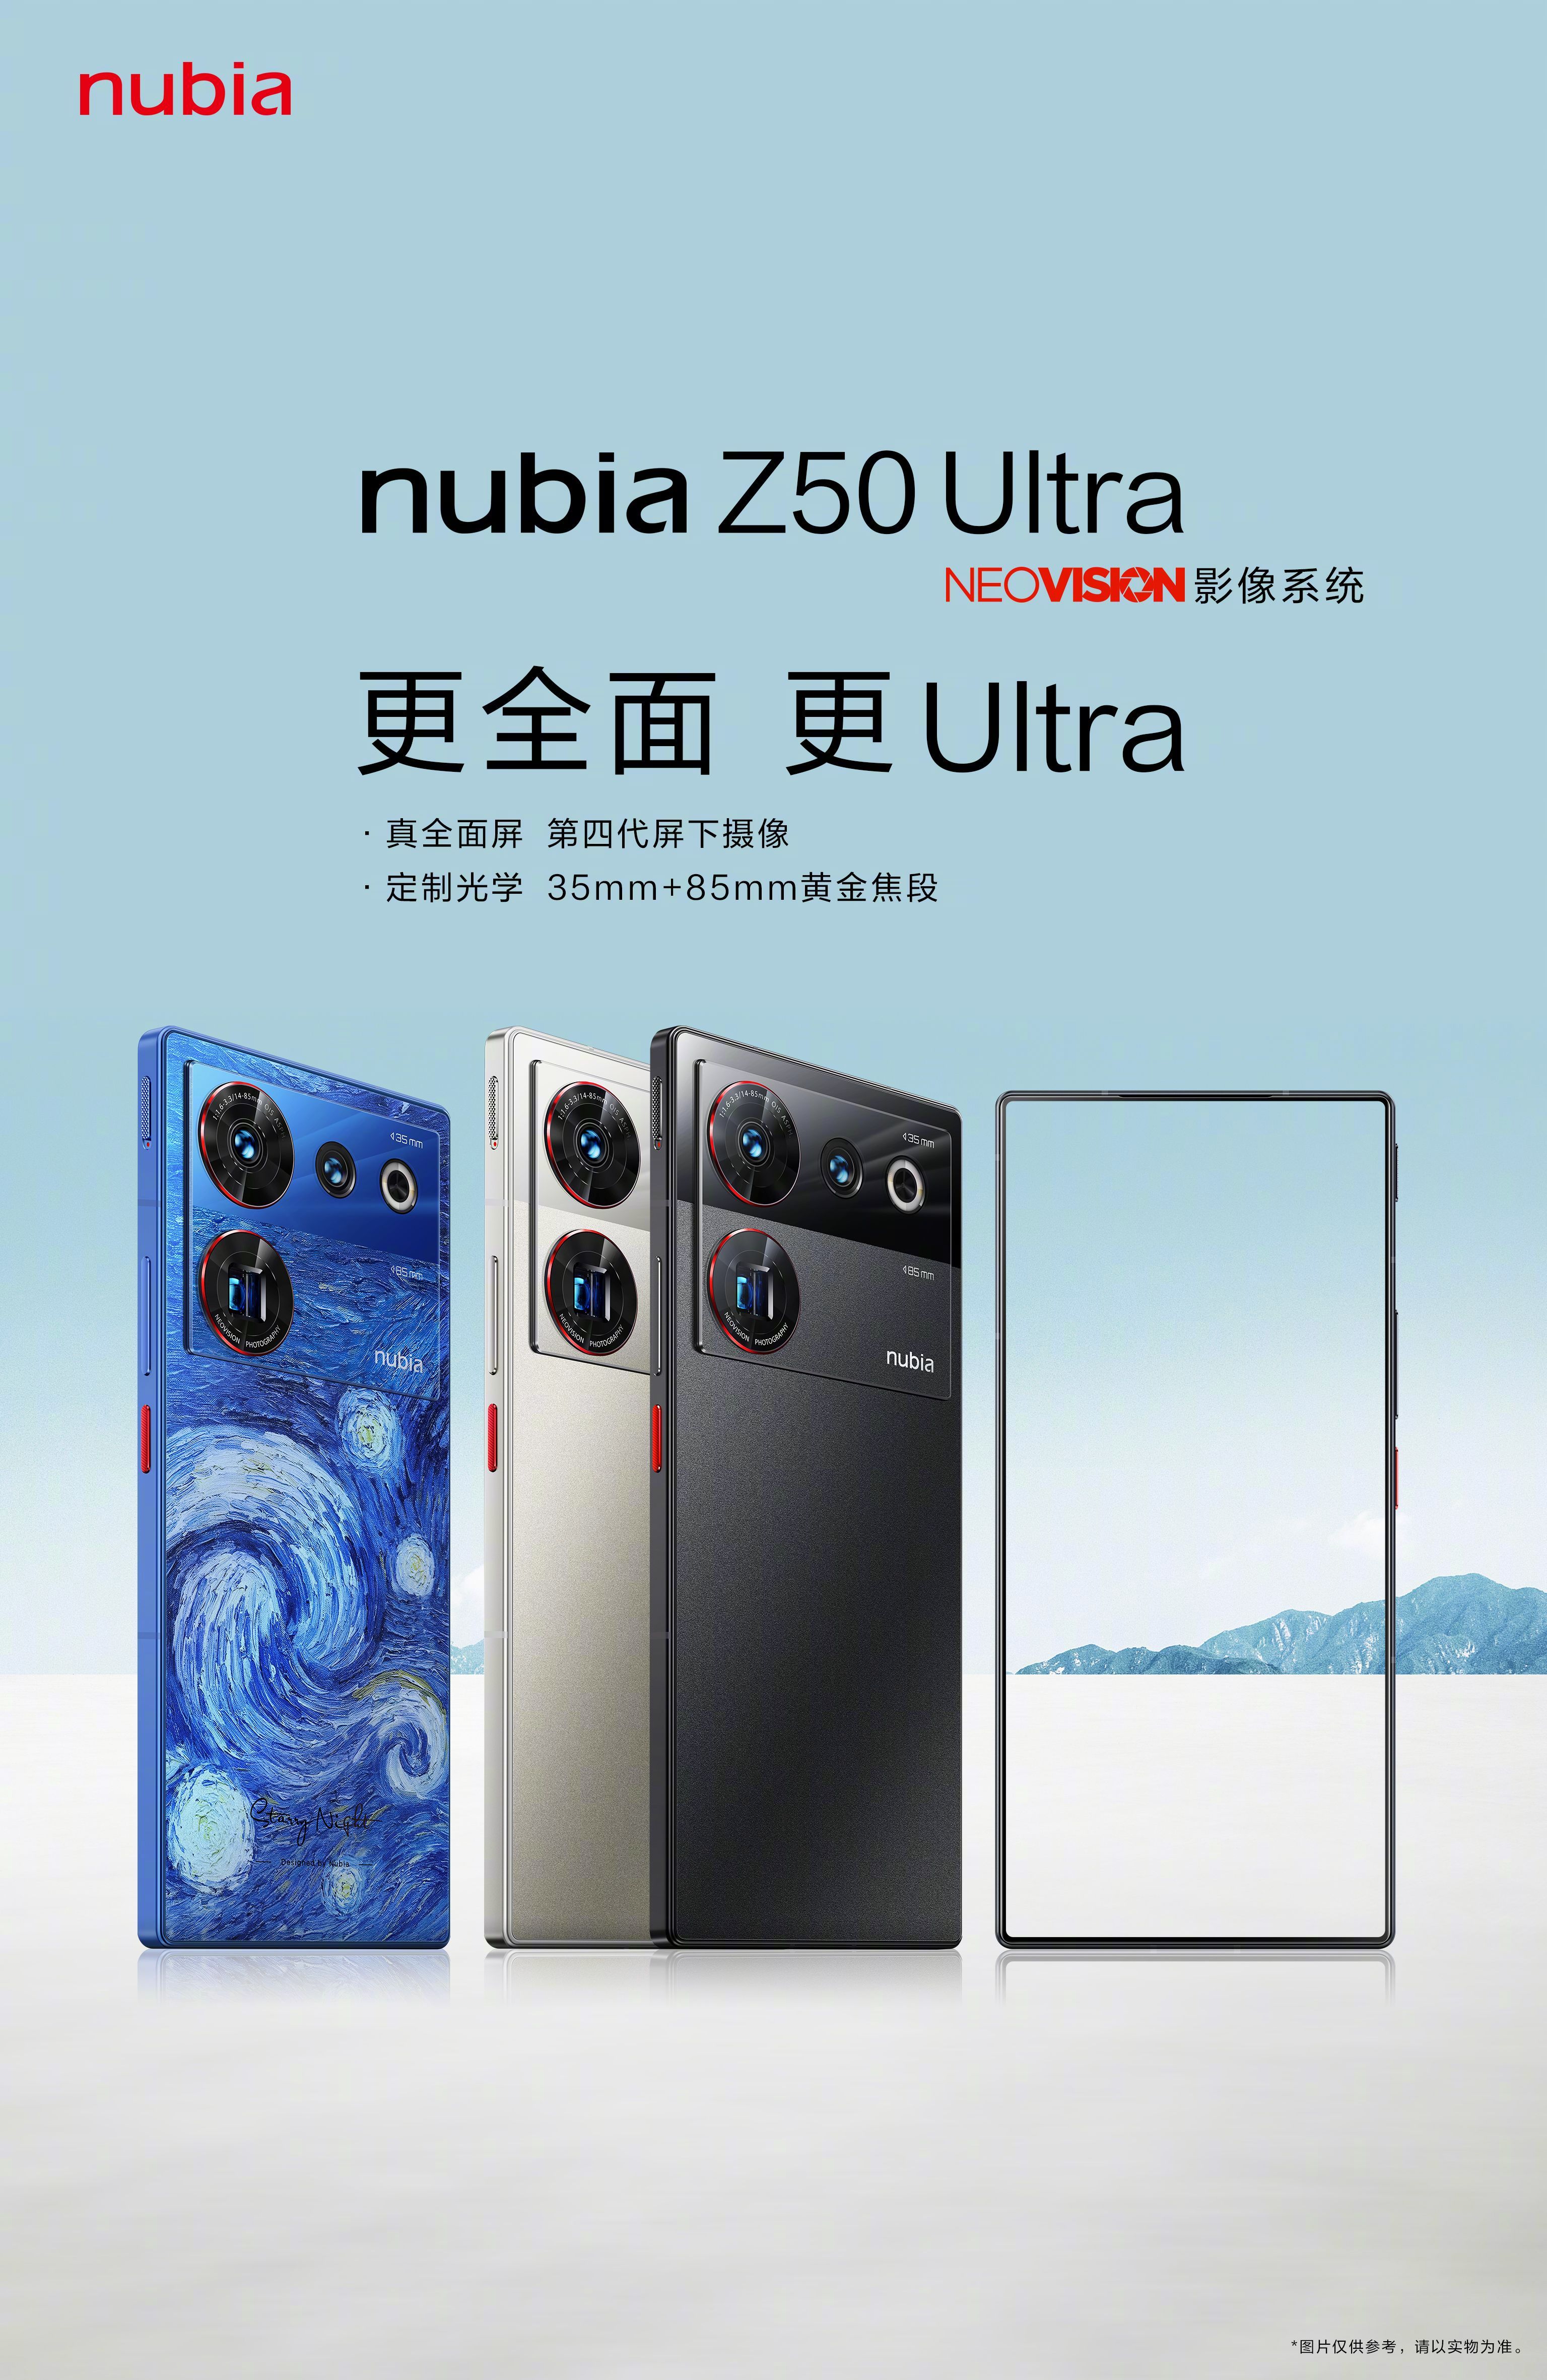 ZTE nubia Z50 Ultra full specifications, pros and cons, reviews